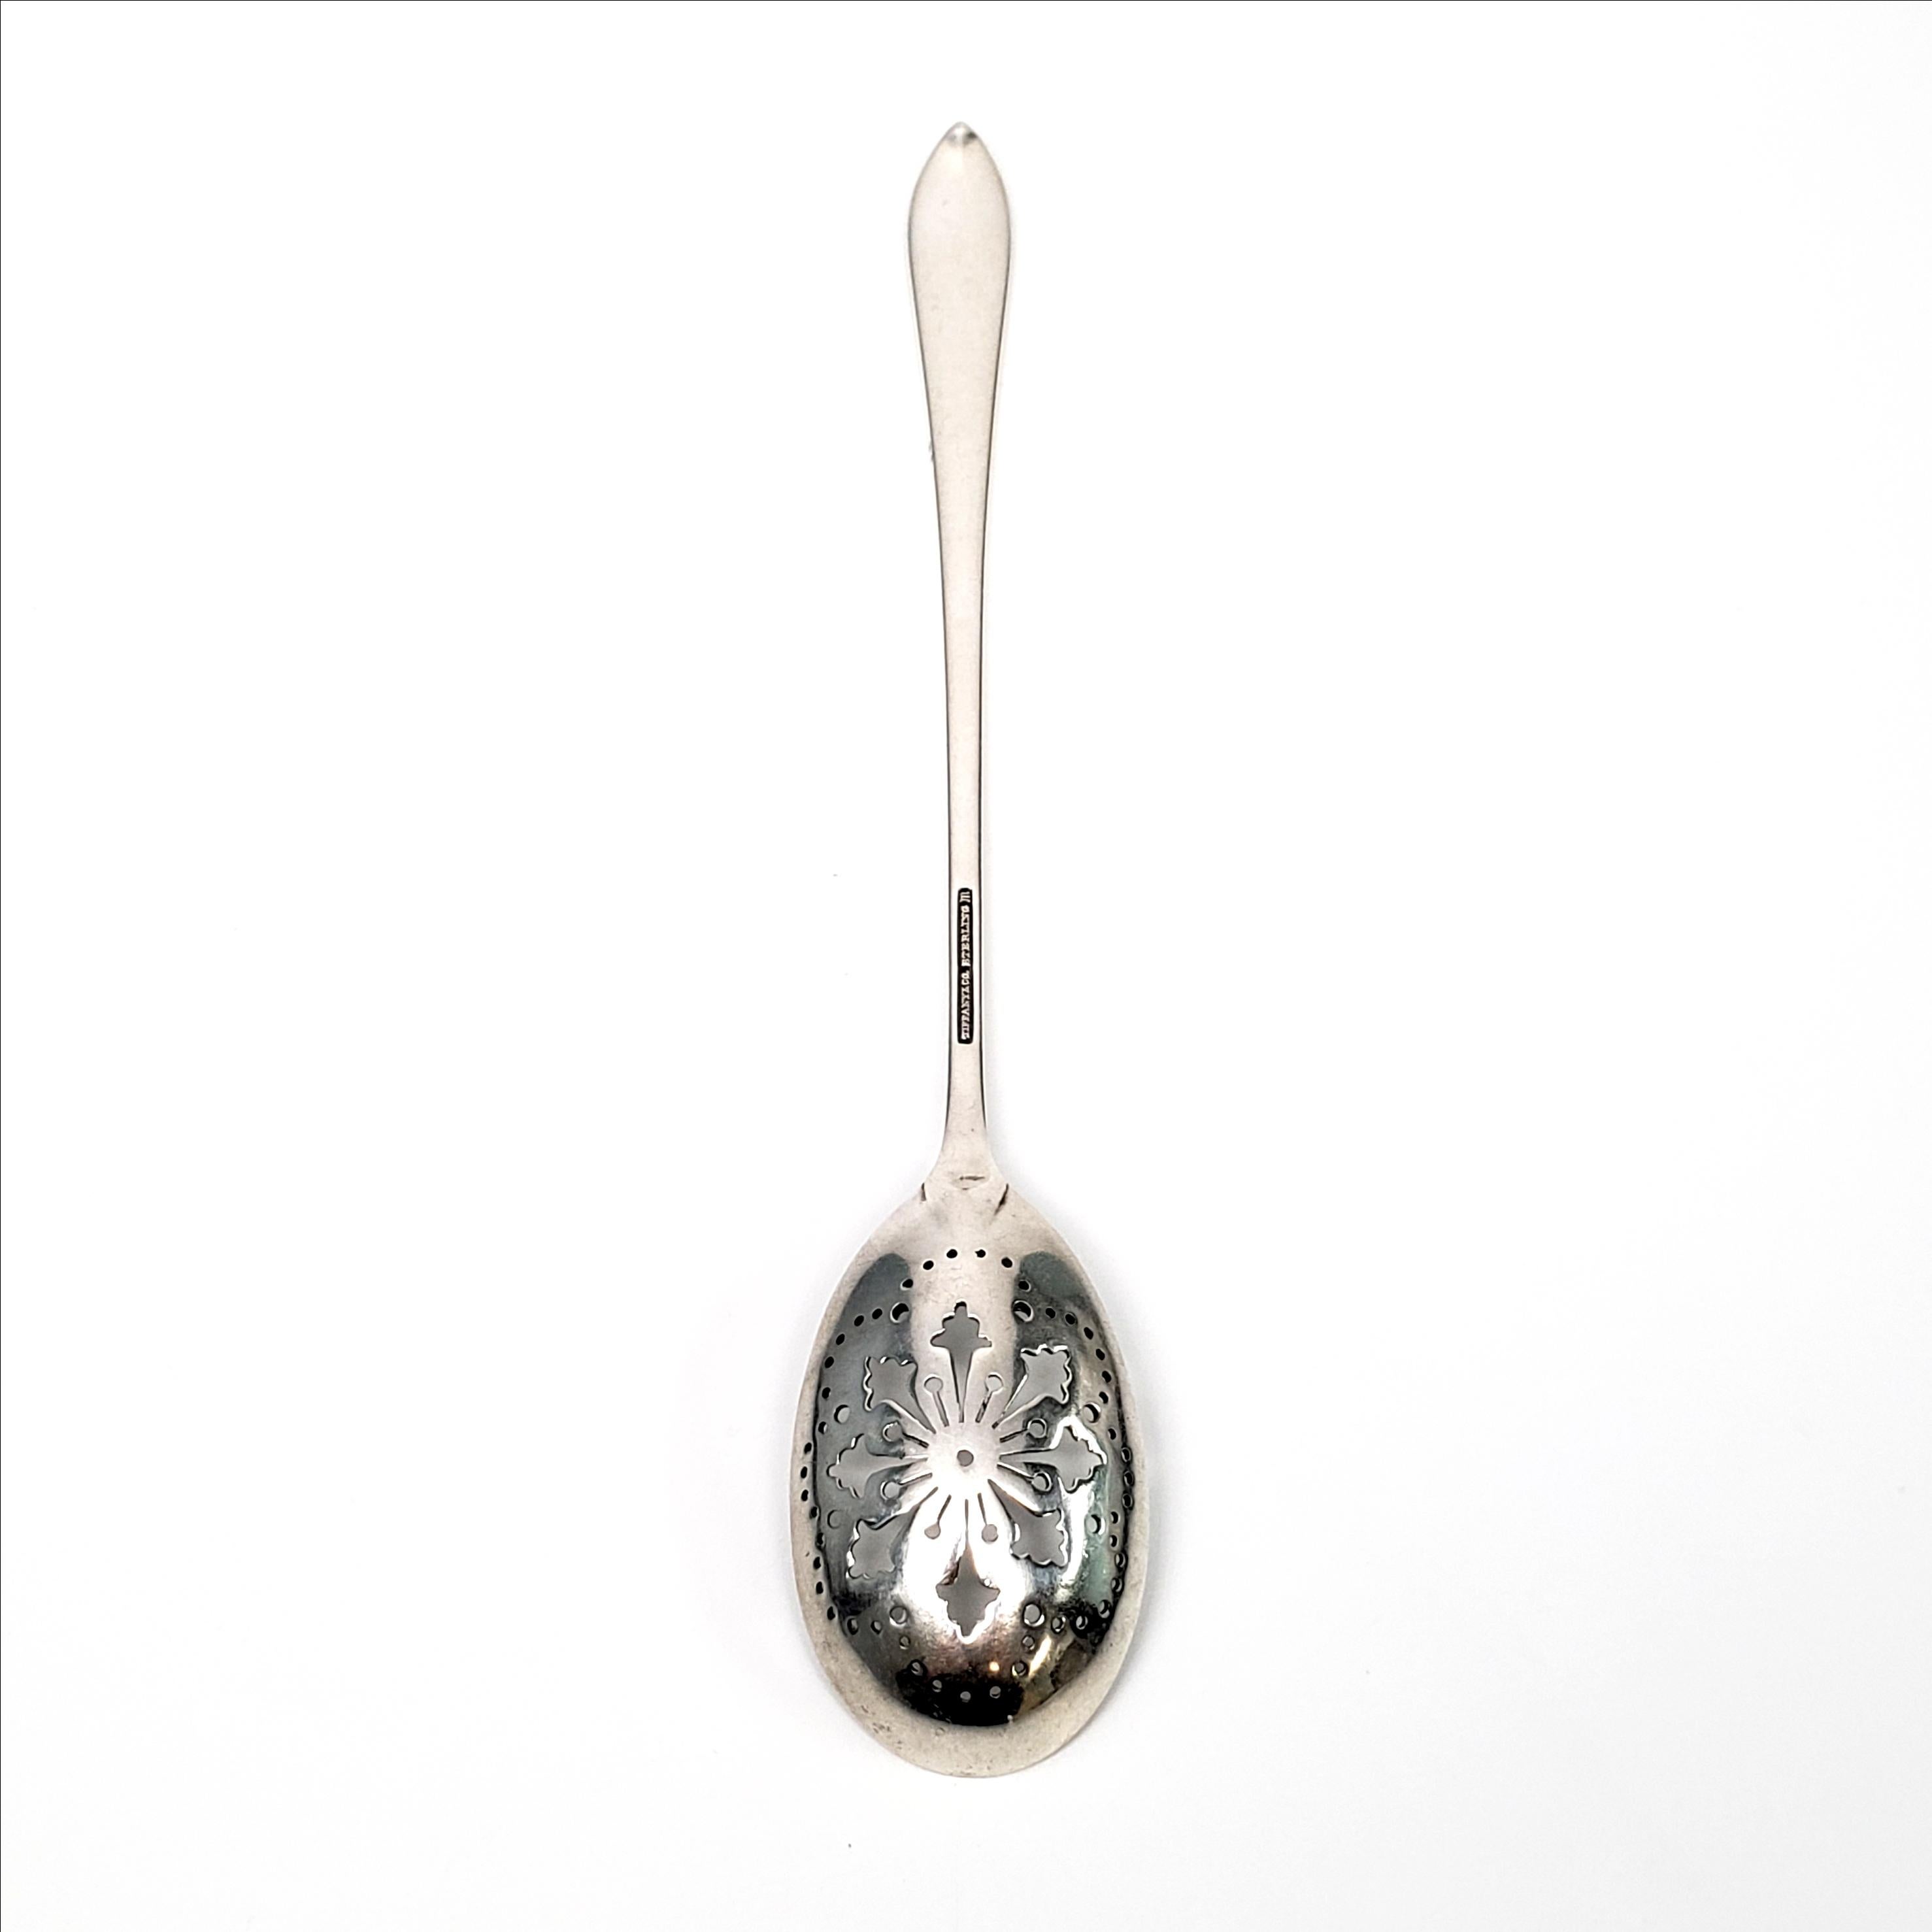 Vintage sterling silver pierced bowl, short handle olive spoon by Tiffany & Co. in the Faneuil pattern.

The Faneuil pattern was in production from 1910-1955 and was named for Faneuil Hall in Boston, MA. The pattern's simple and elegant design